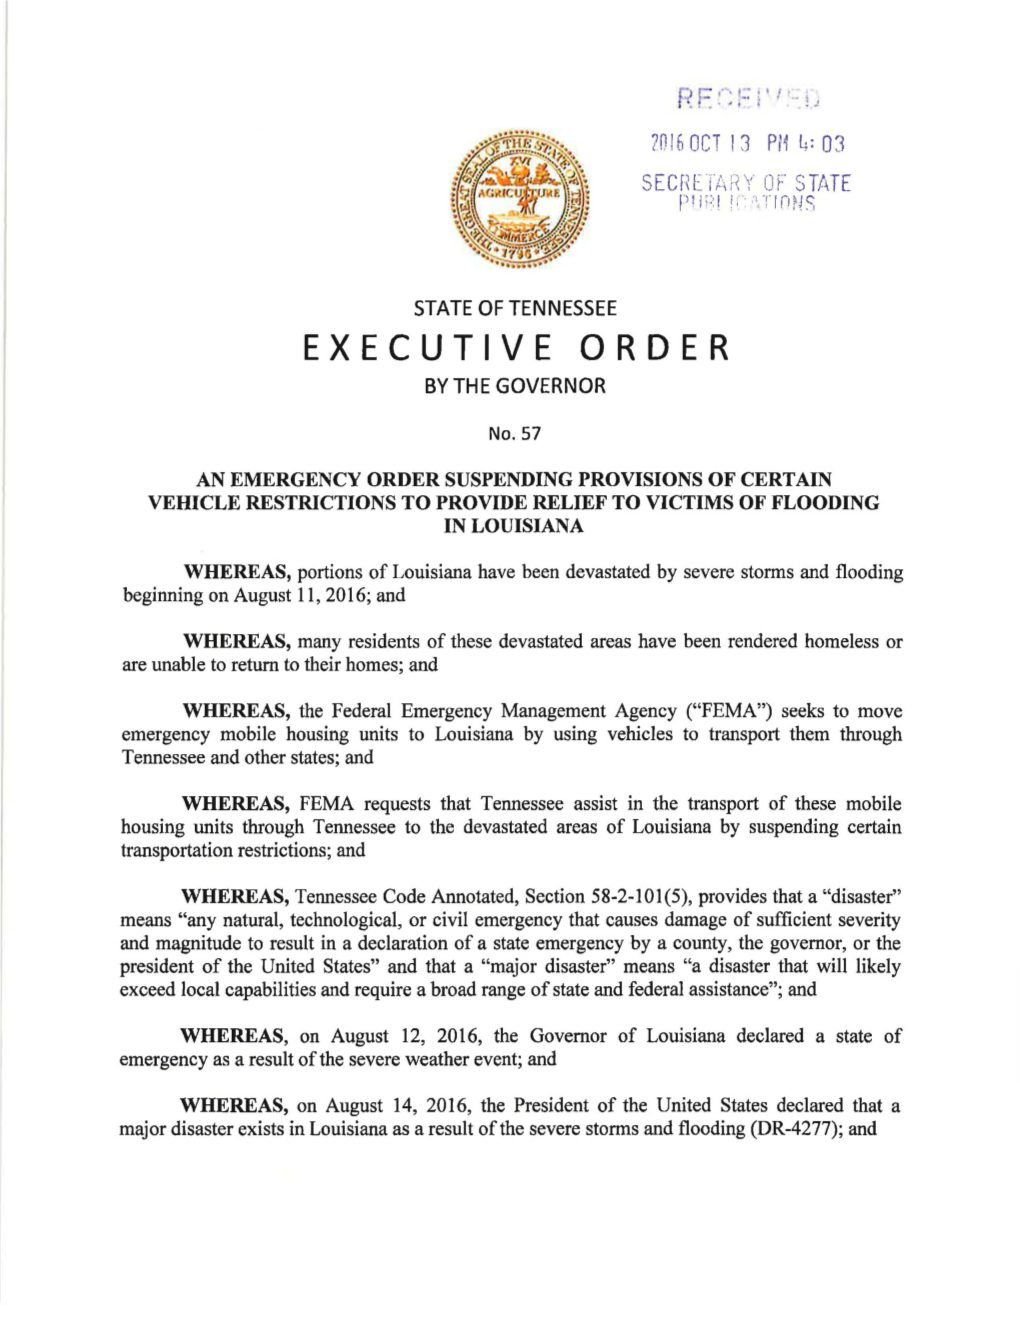 Executive Order by the Governor